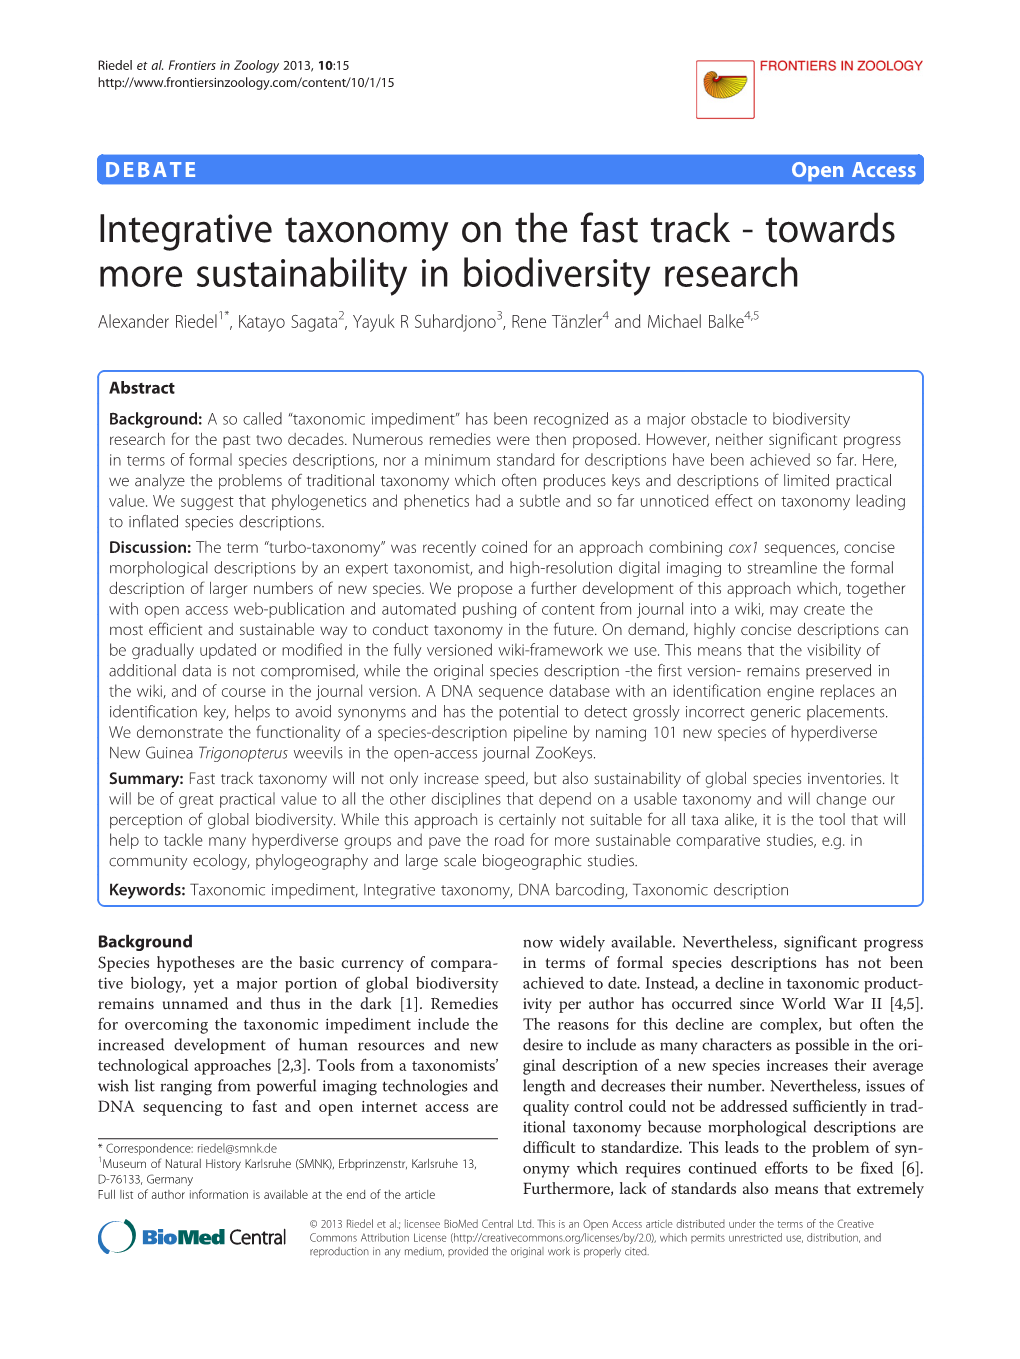 Integrative Taxonomy on the Fast Track